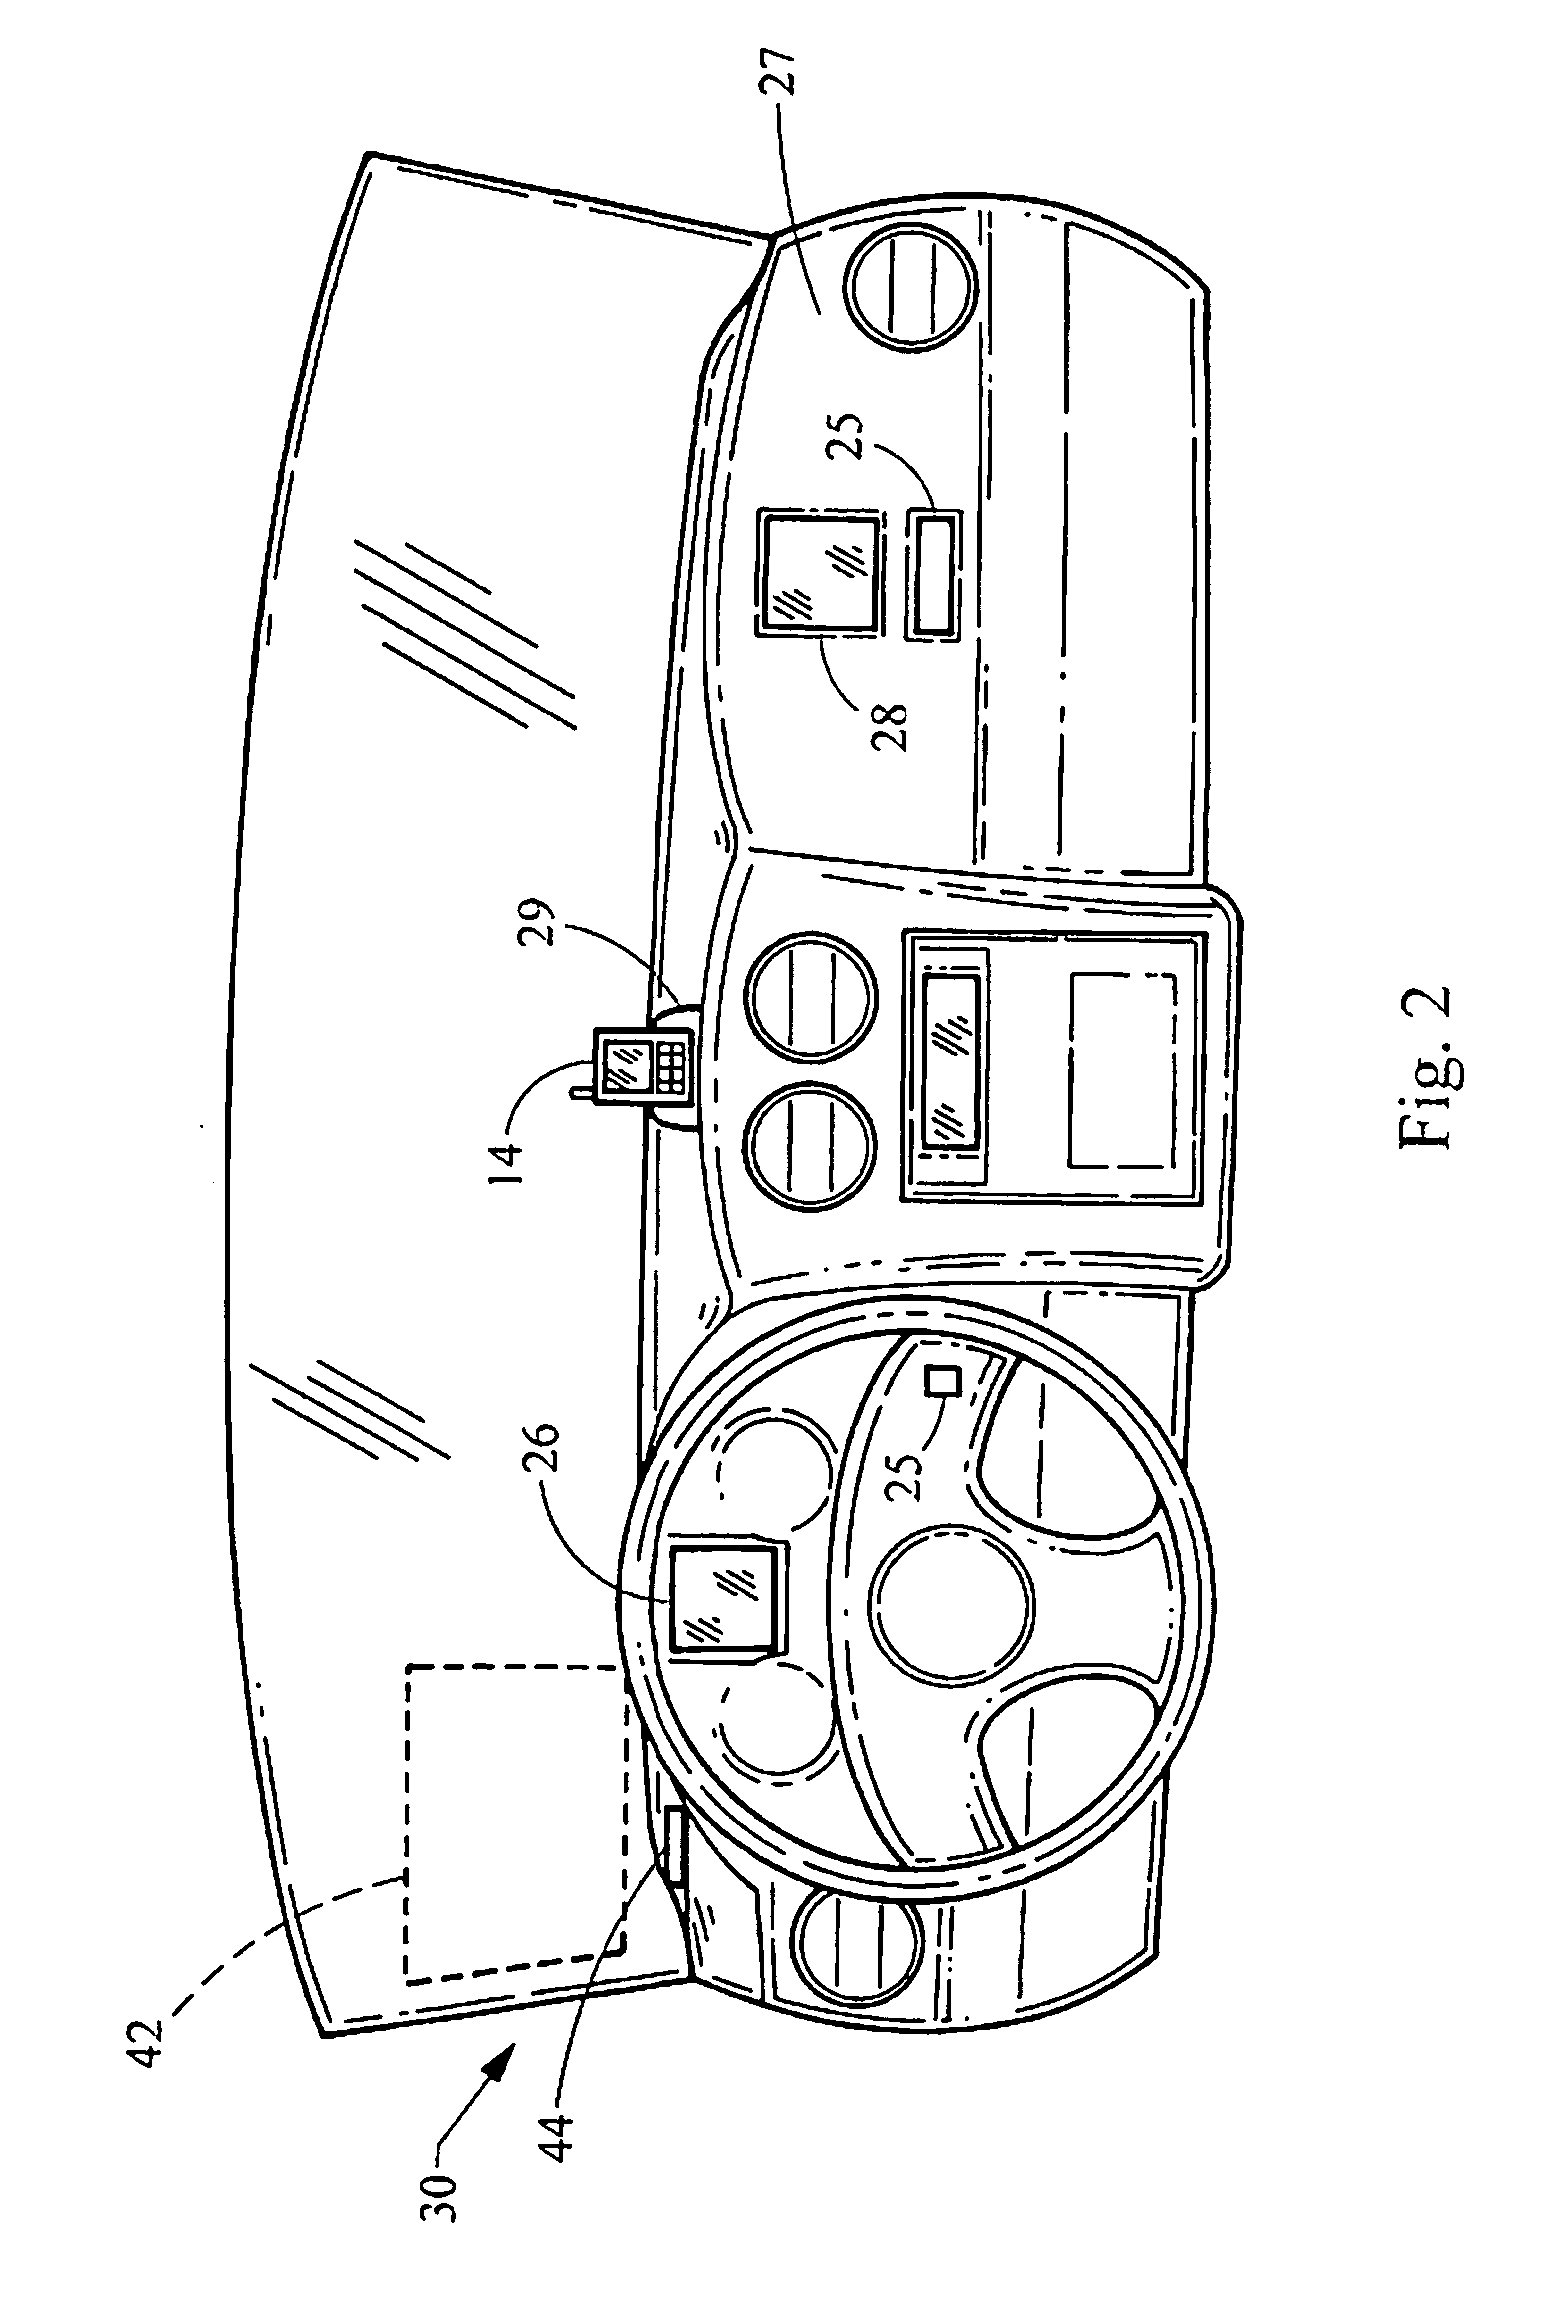 Display replication and control of a portable device via a wireless interface in an automobile